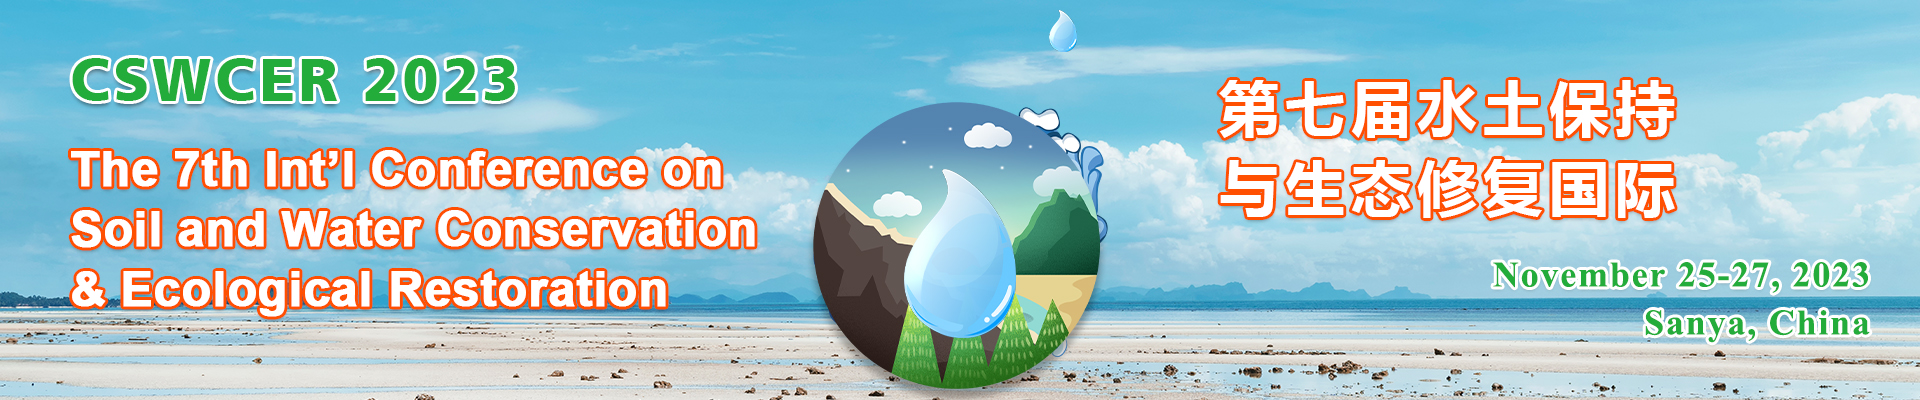 The 7th Int’l Conference on Soil and Water Conservation & Ecological Restoration (CSWCER 2023)